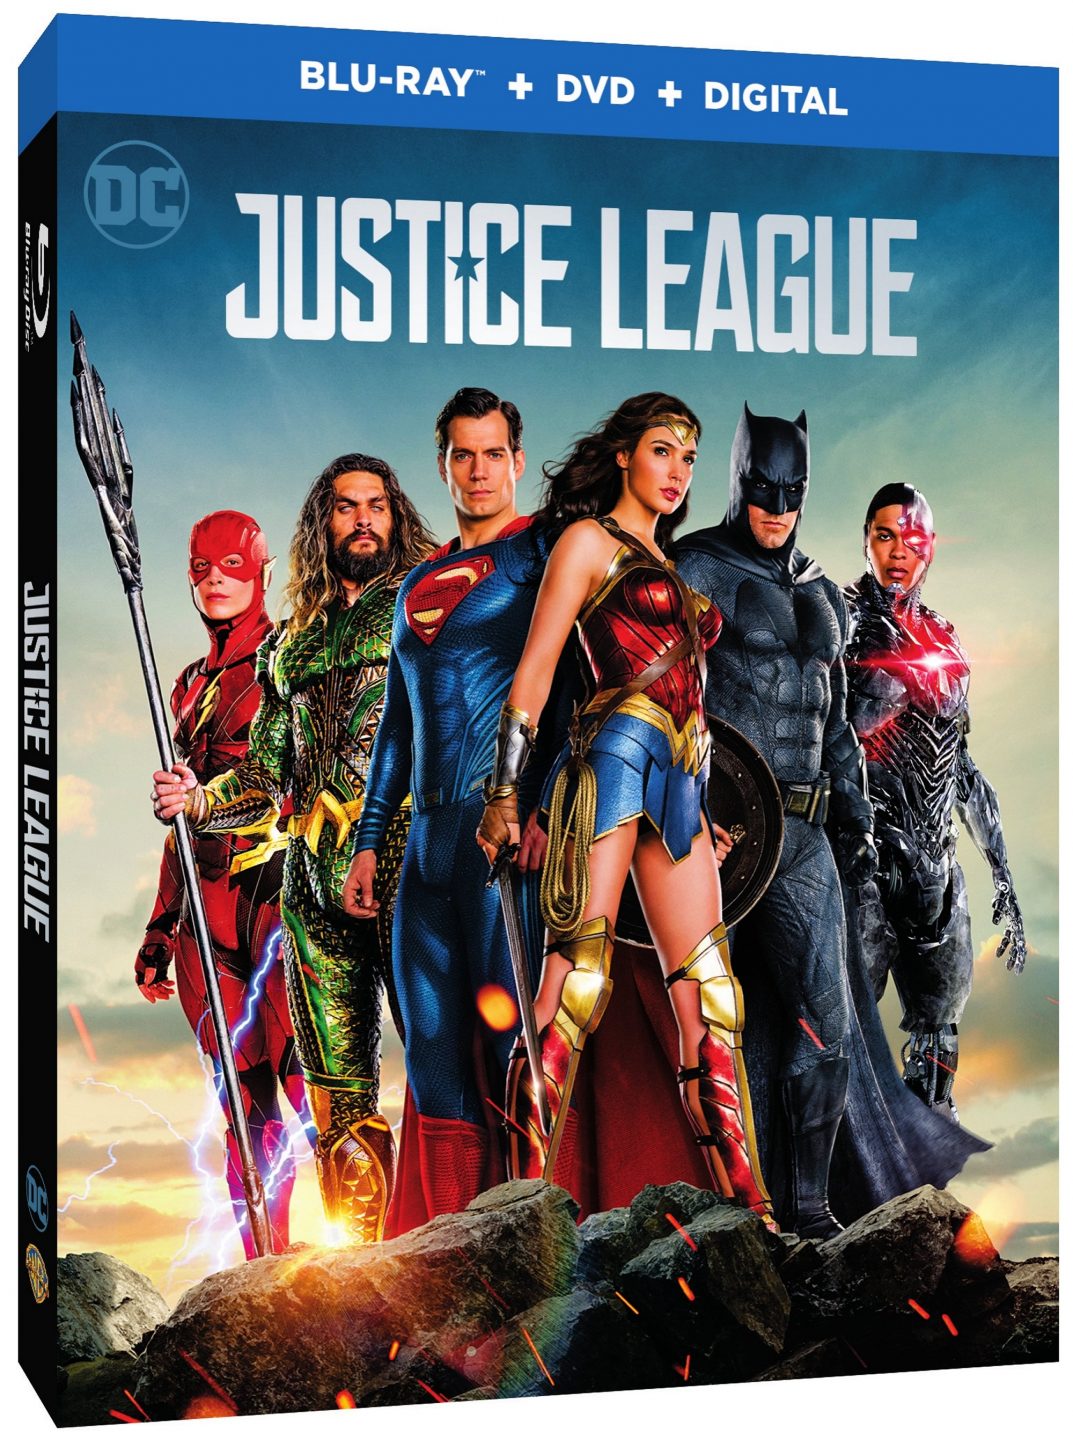 Justice League Blu-Ray Combo cover (Warner Bros. Home Entertainment)